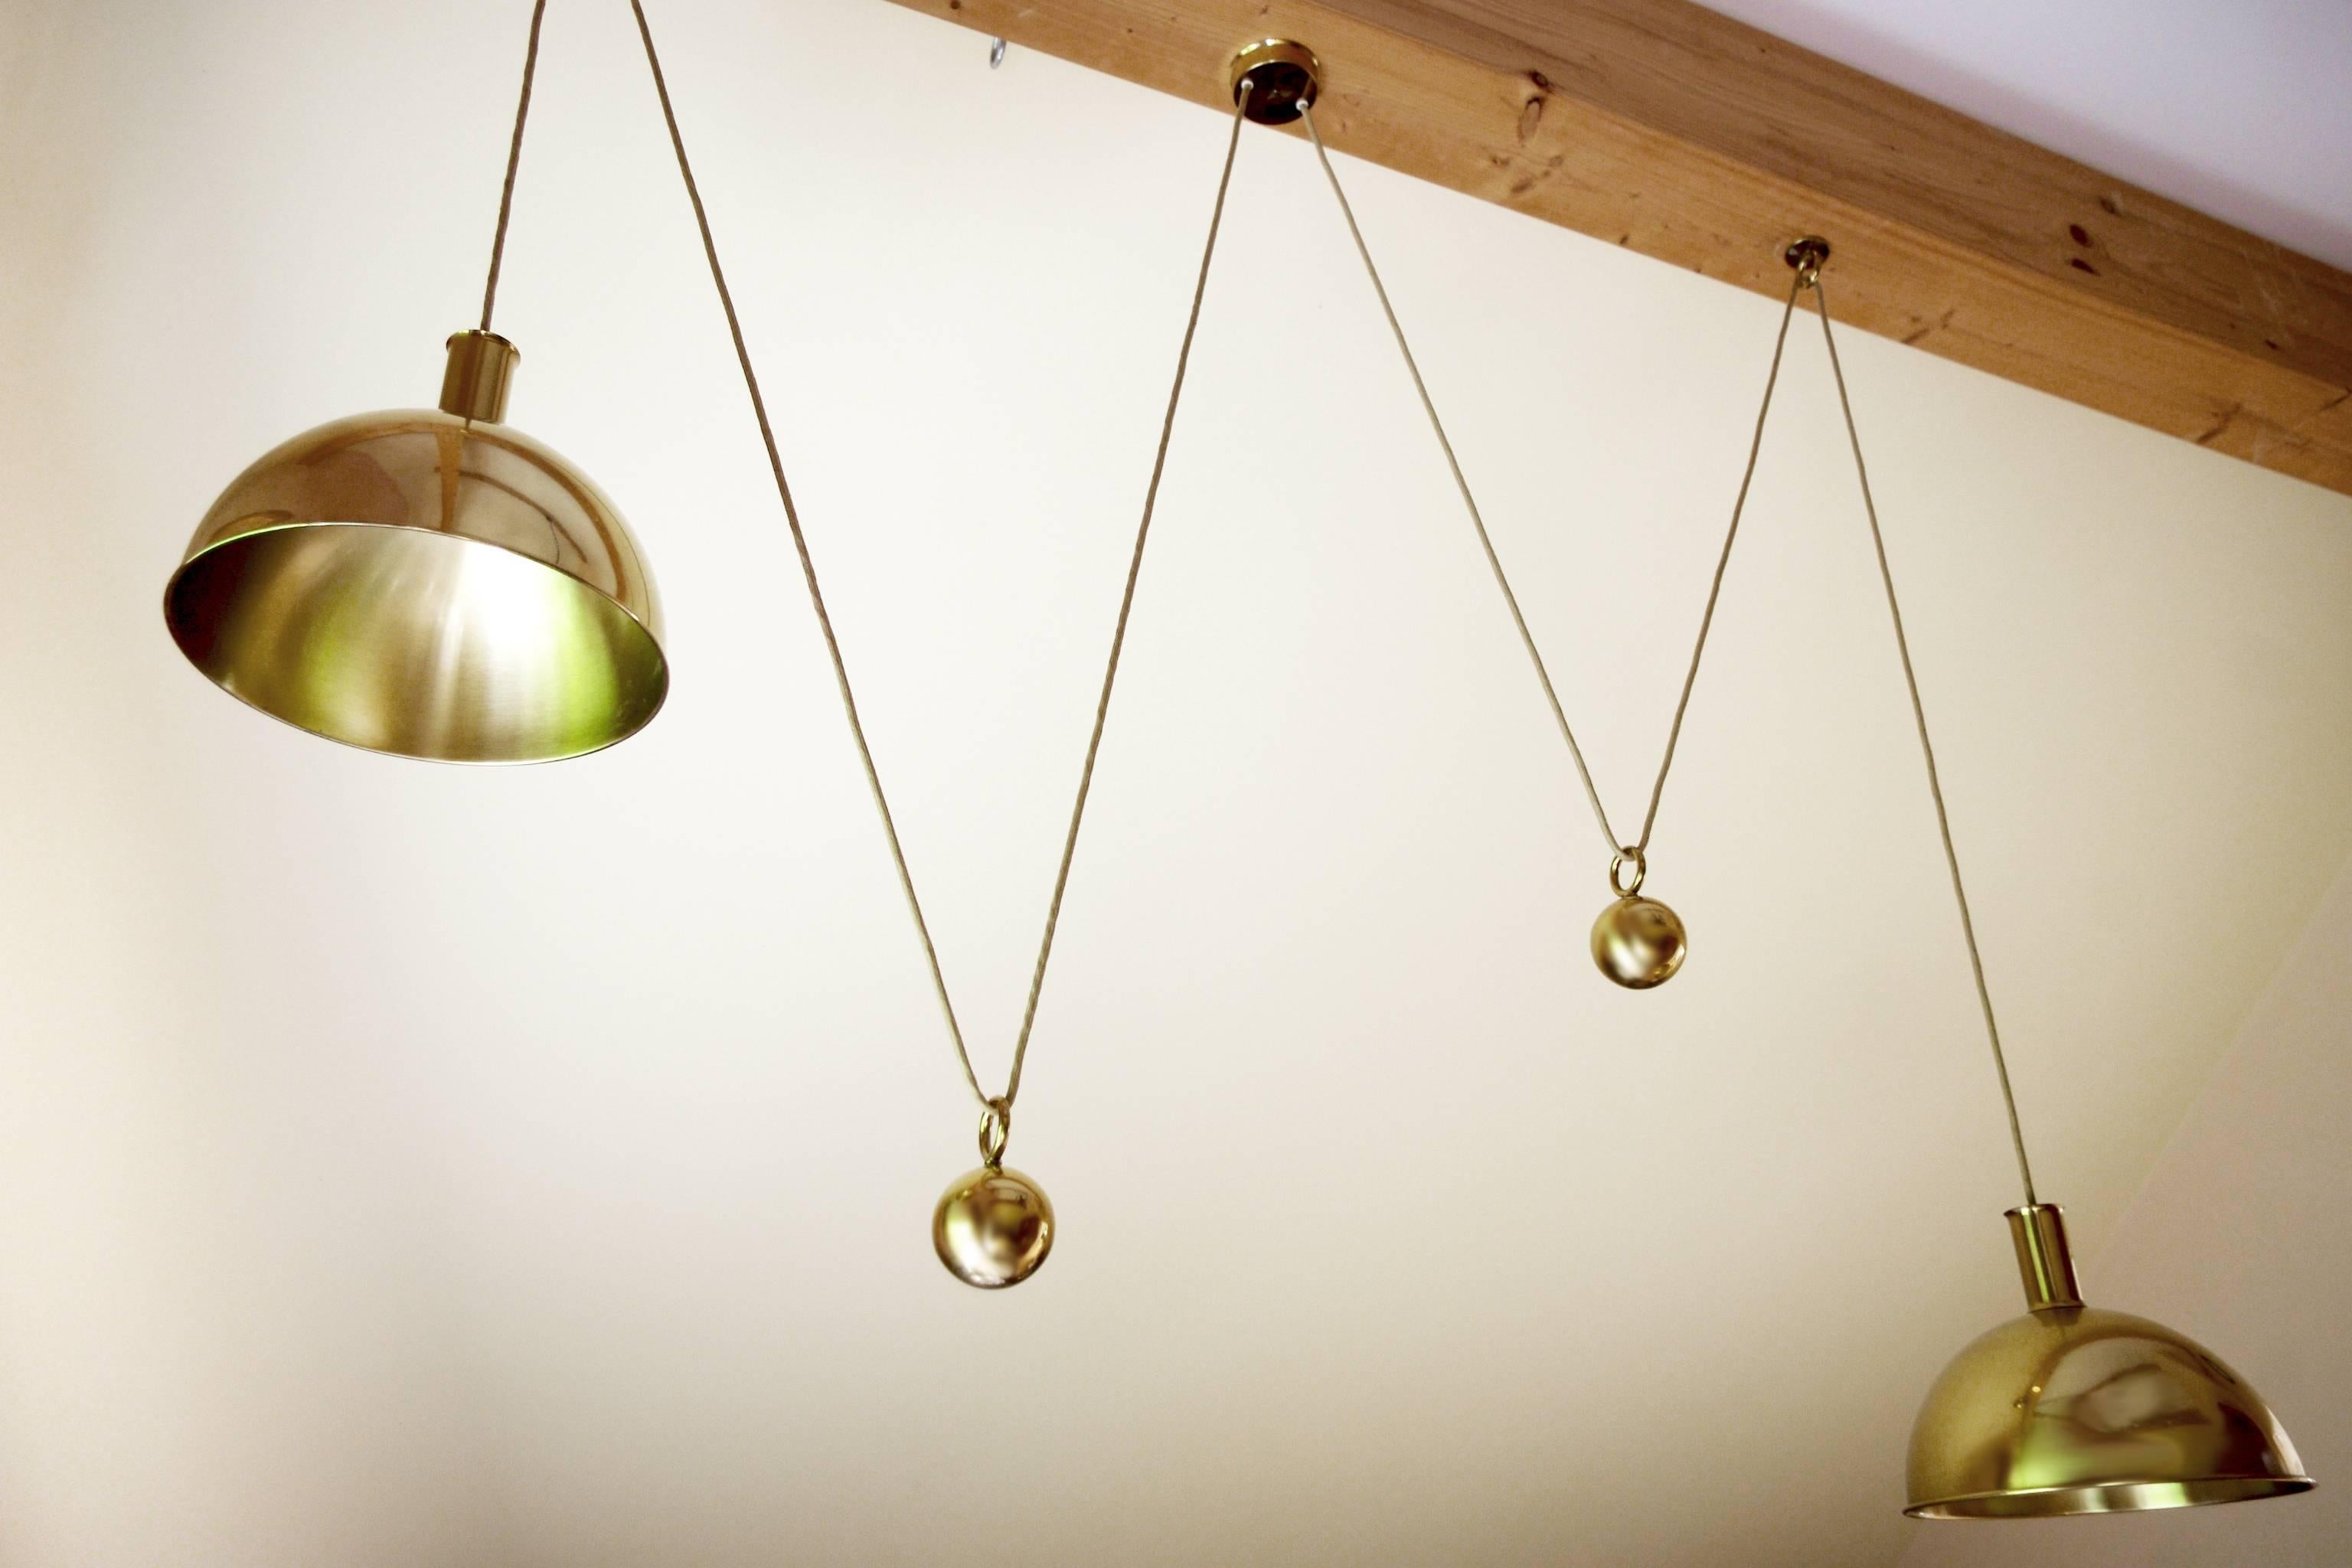 Polished Vintage Double Posa Counterweight Pendant Lamp Ceiling Light by Florian Schulz